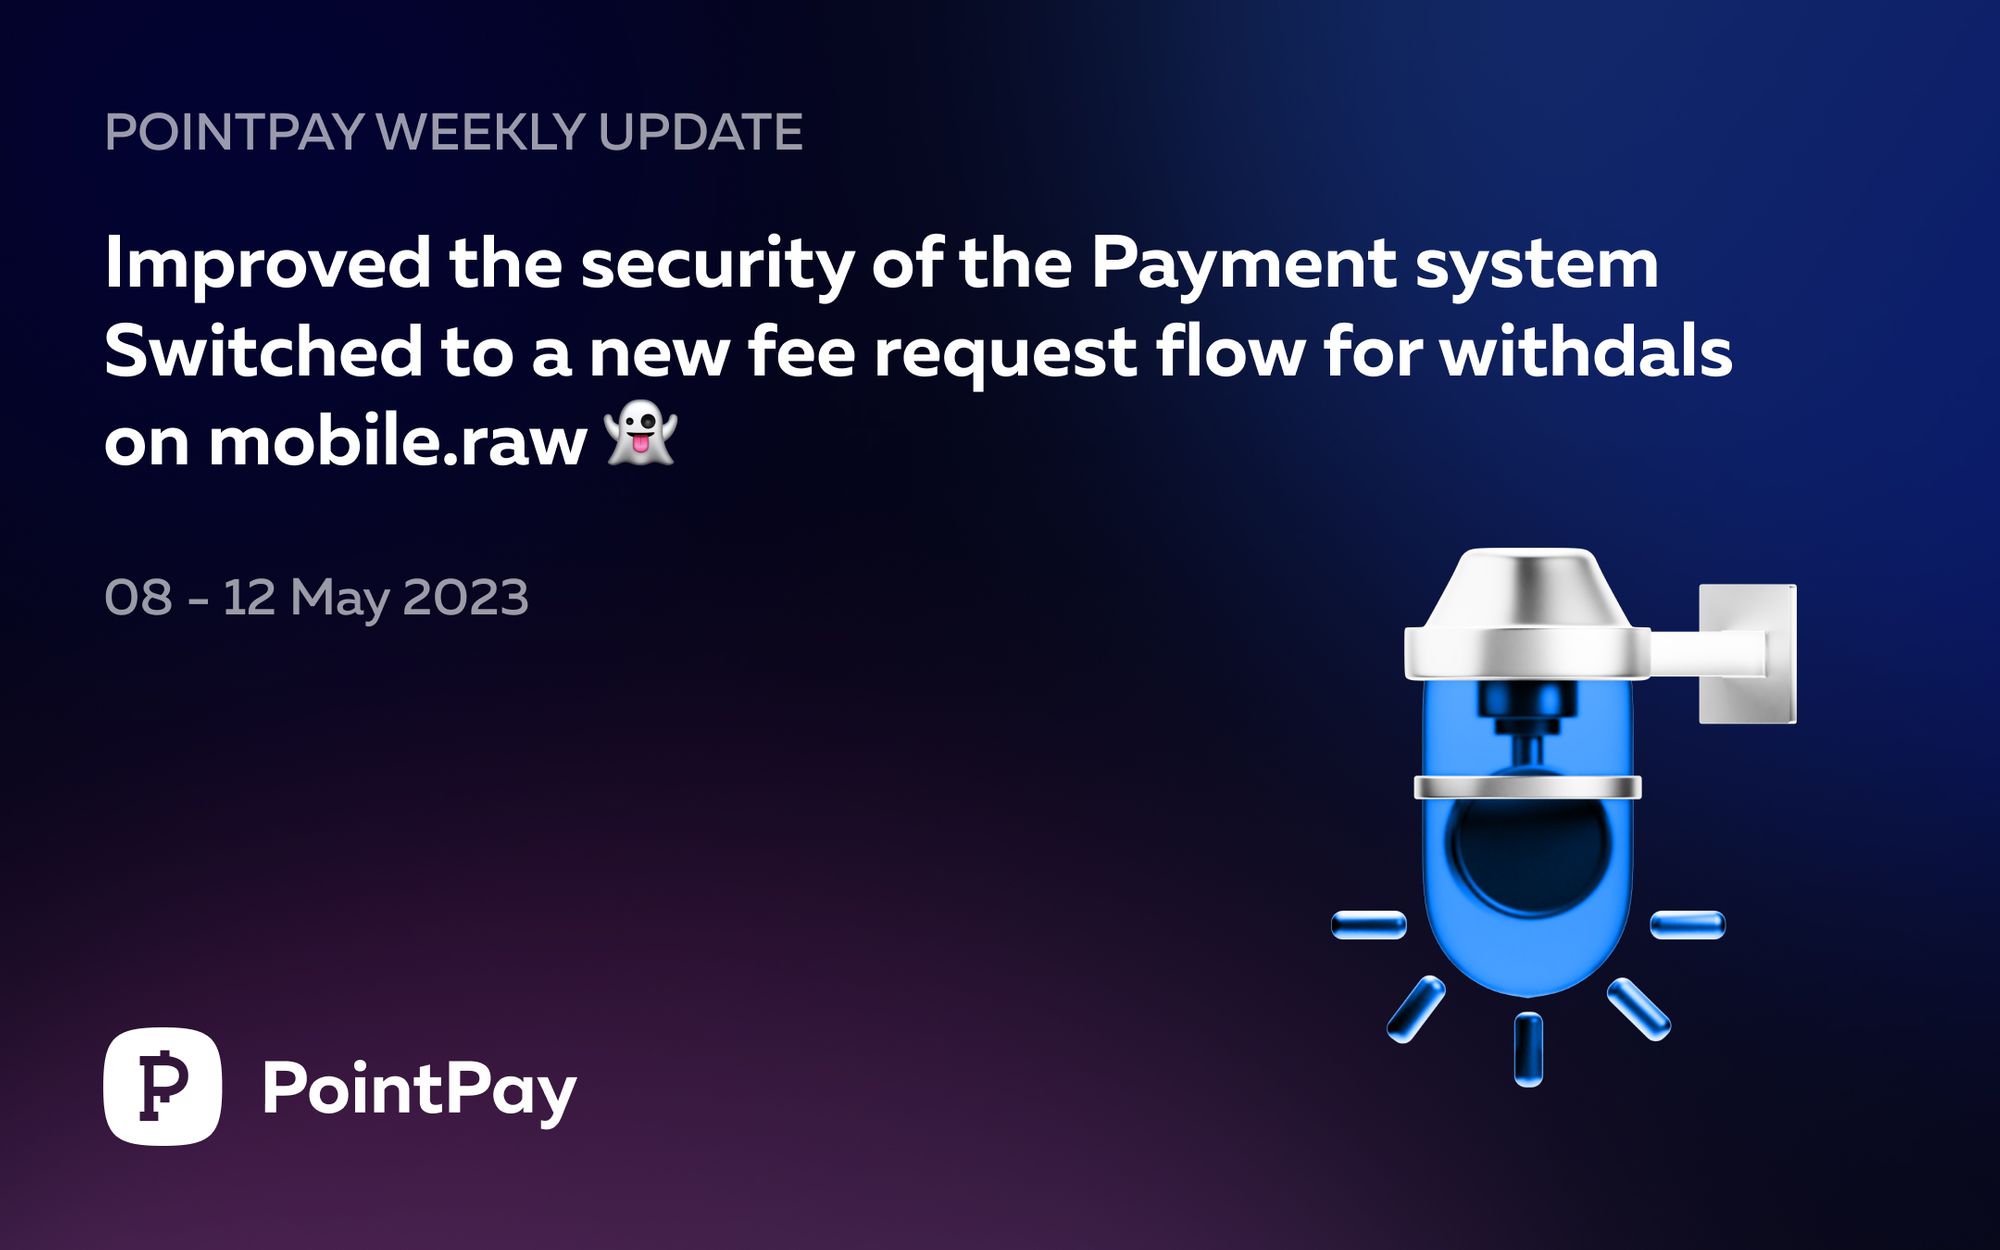 PointPay Weekly Update (8 - 12 May 2023)